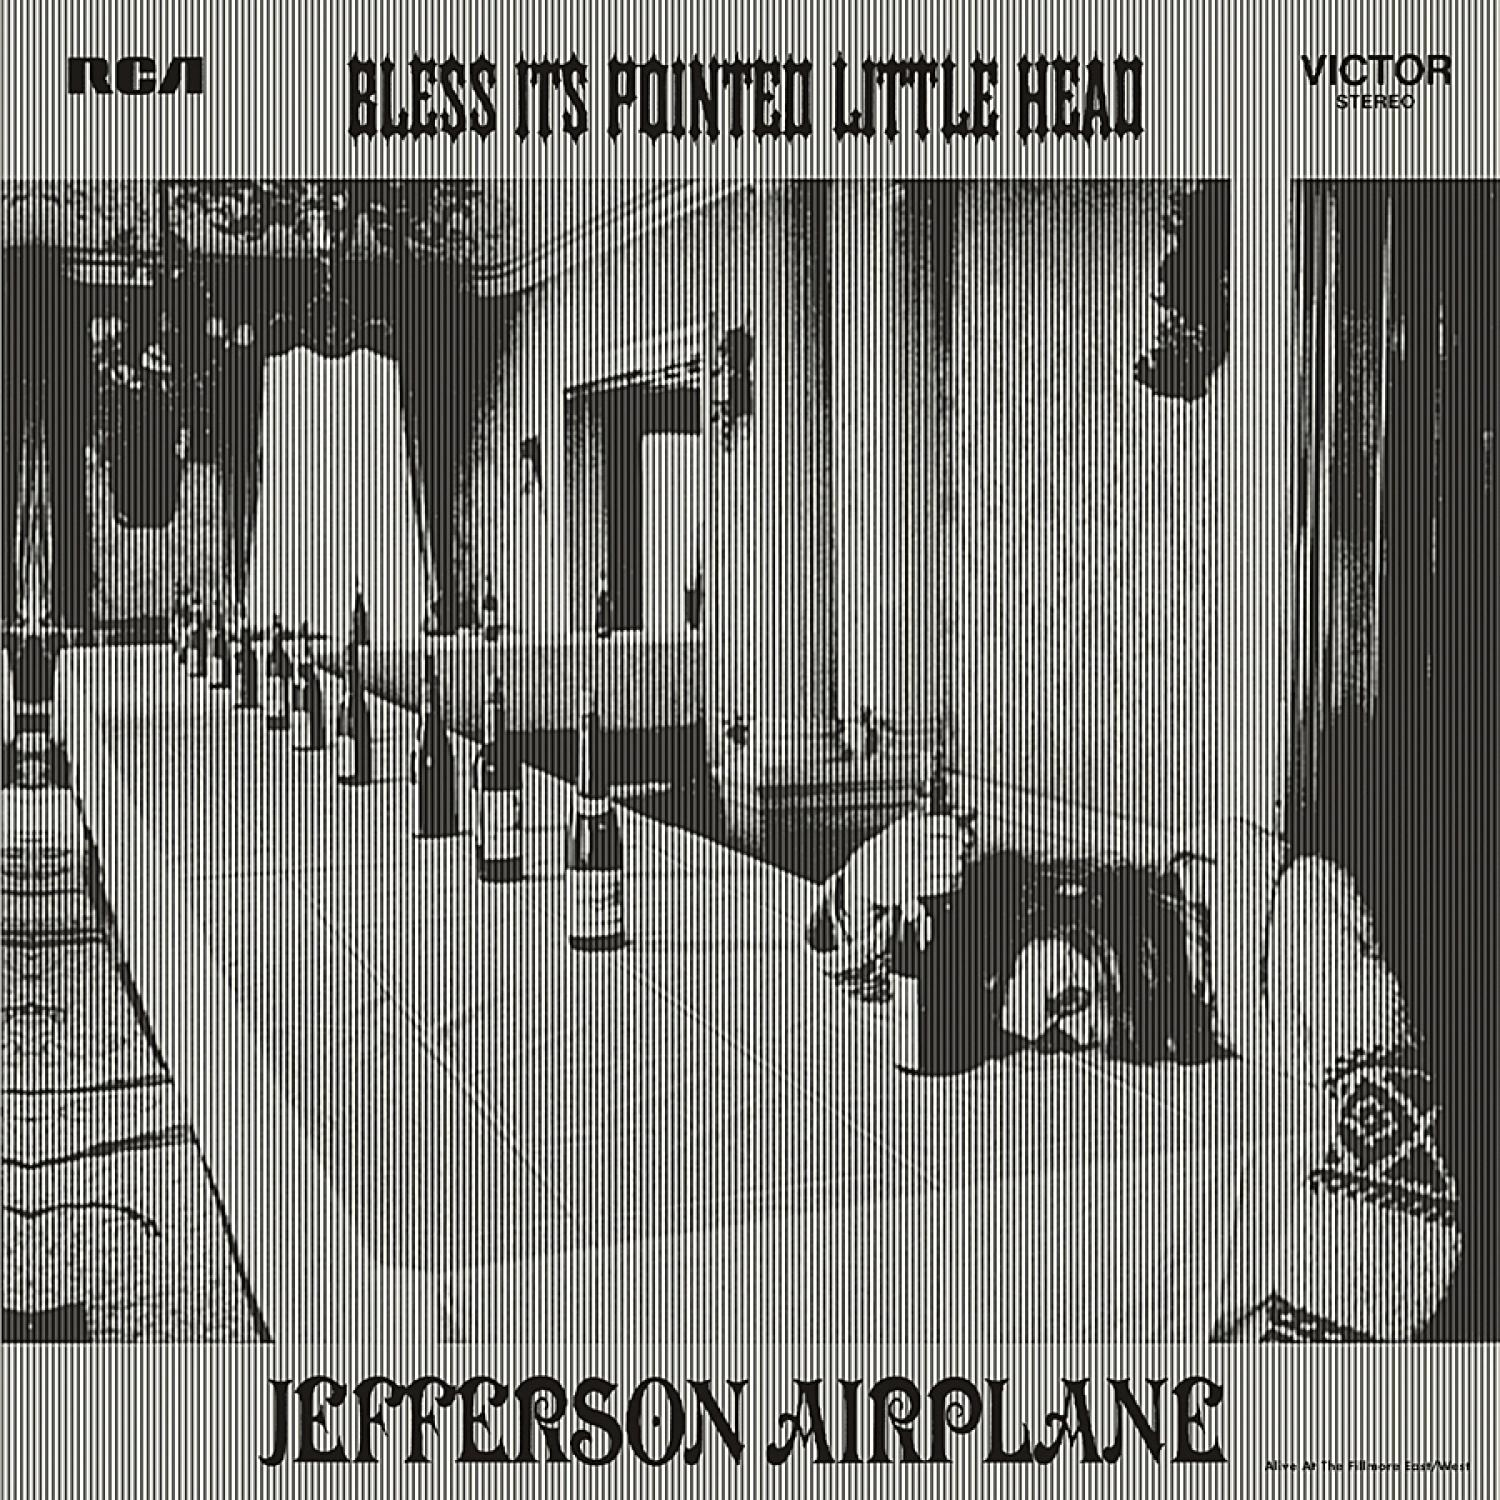 Head Little Its - Pointed Jefferson Bless Airplane - (CD)